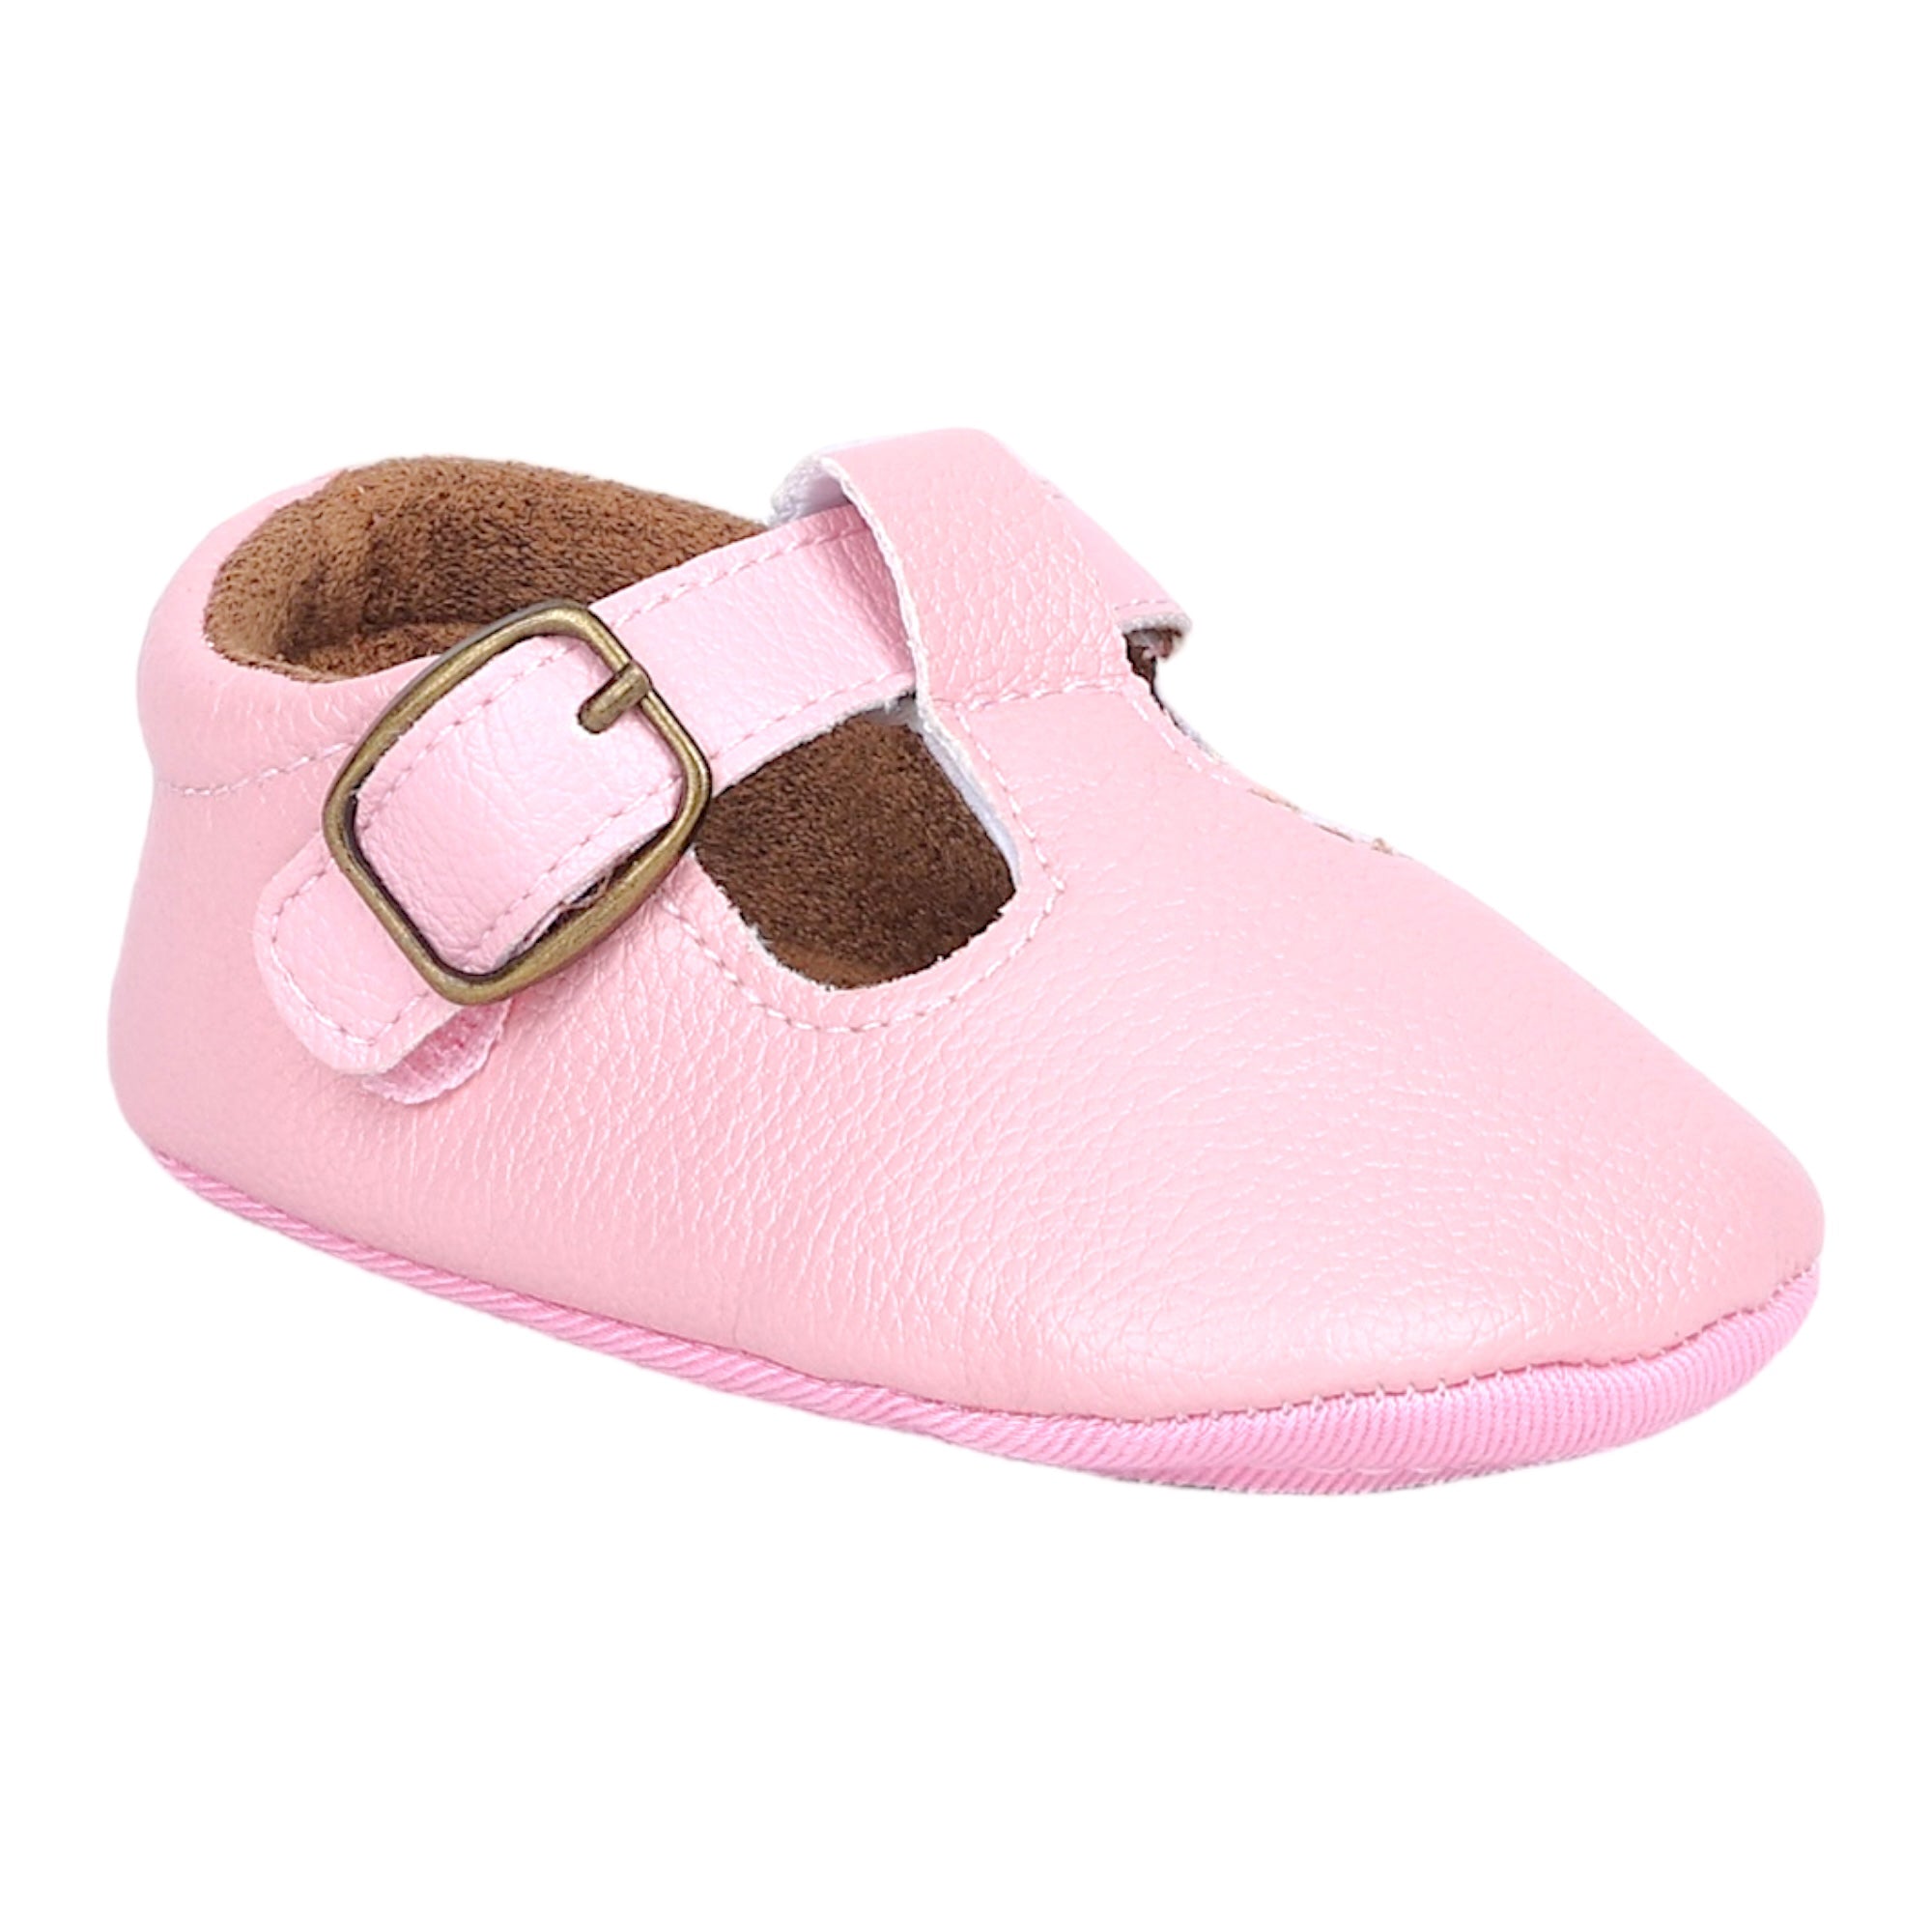 Baby Moo Textured Leather T-Strap Velcro Buckle Anti-Skid Ballerina Pram Shoes - Pink